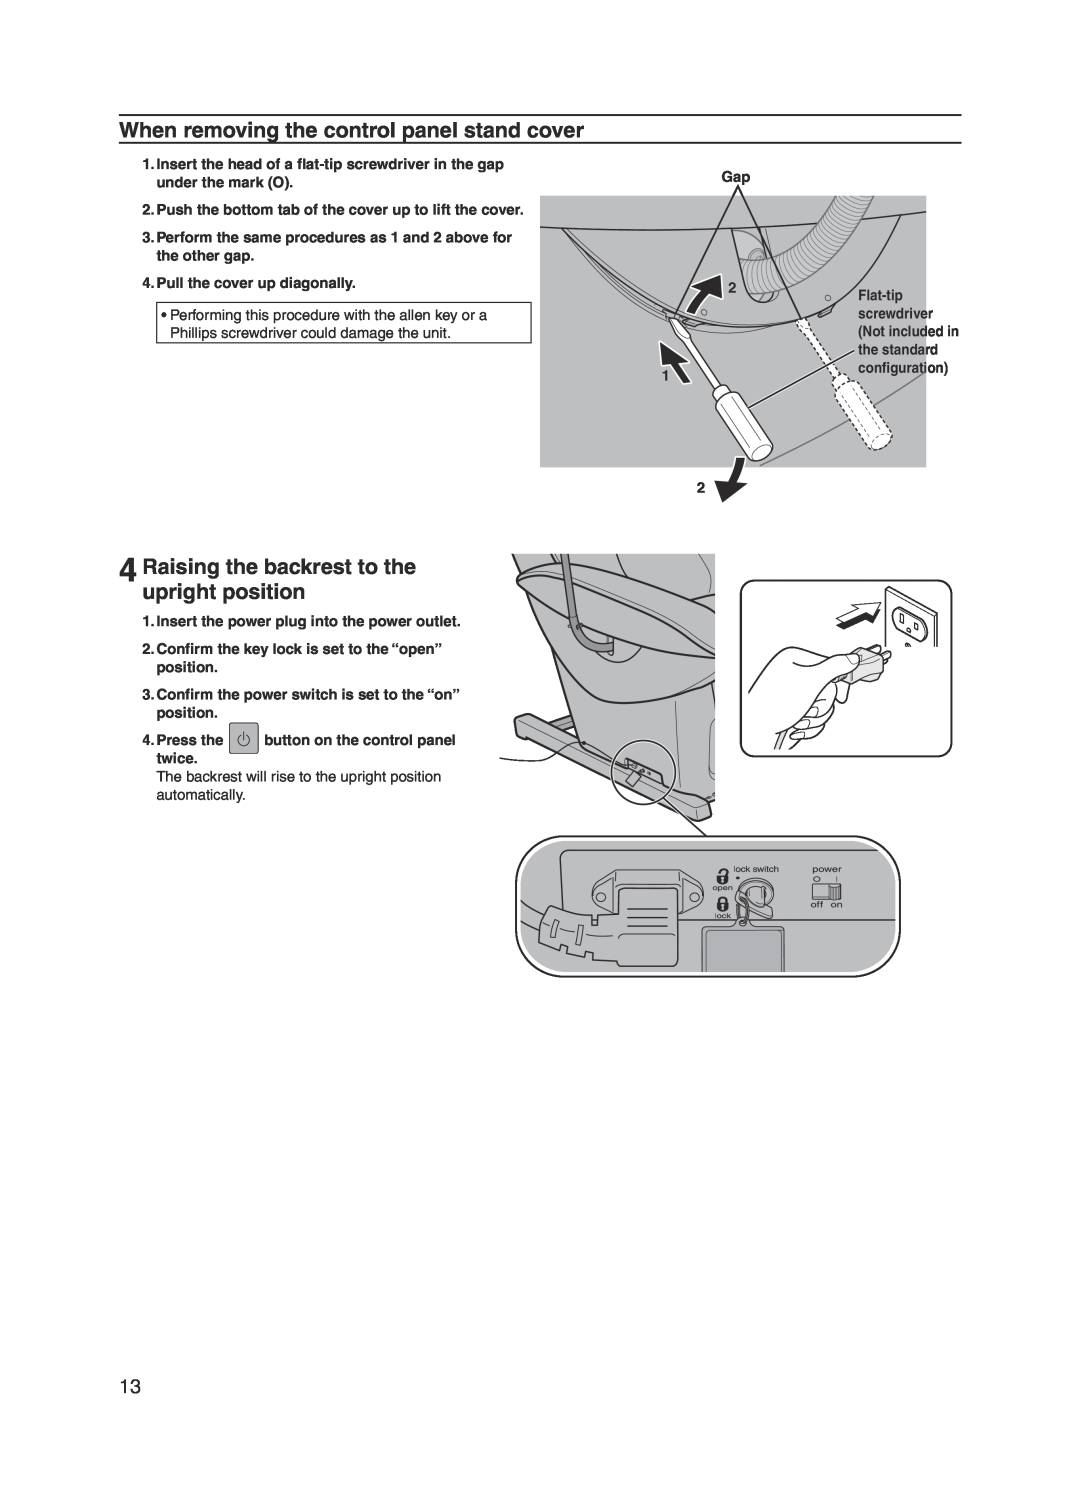 Panasonic 30003 manual When removing the control panel stand cover, Raising the backrest to the upright position 